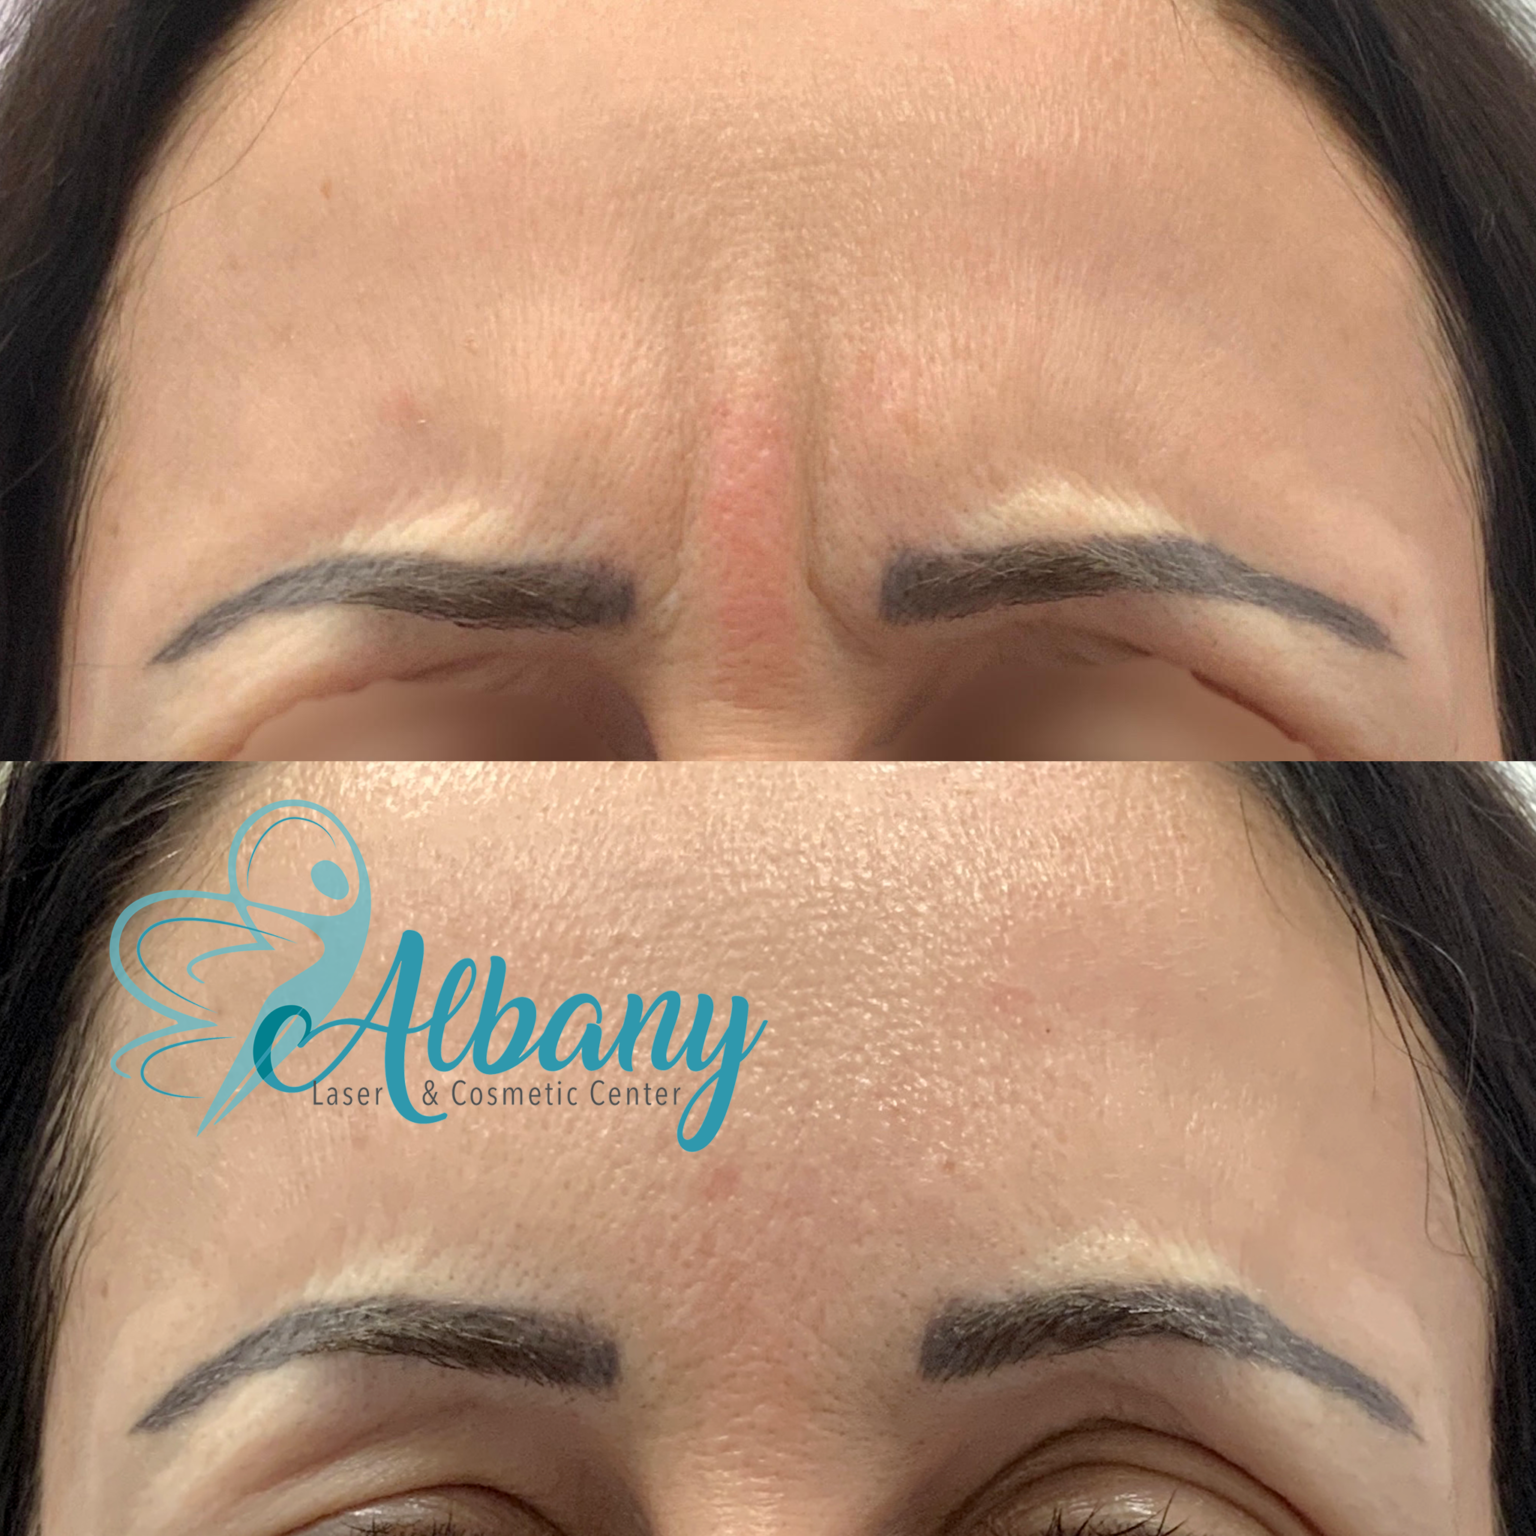 Before and after pictures of a patient's forehead showing significant reduction in frown lines and wrinkles after Botox treatment at Albany Cosmetic and Laser Centre in Edmonton.